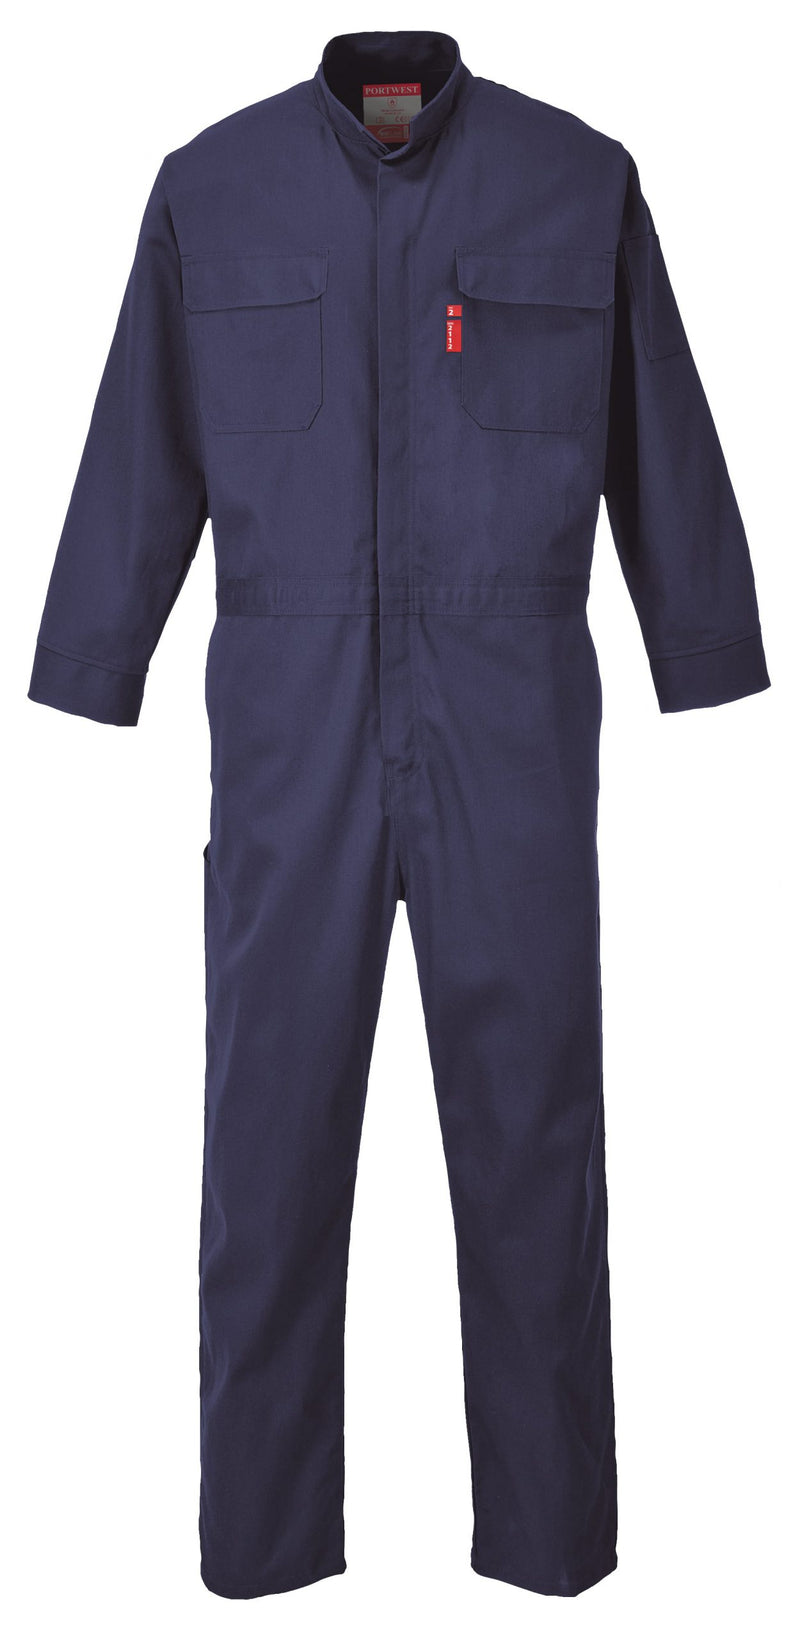 Portwest Bizflame 88/12 Coverall nAVY